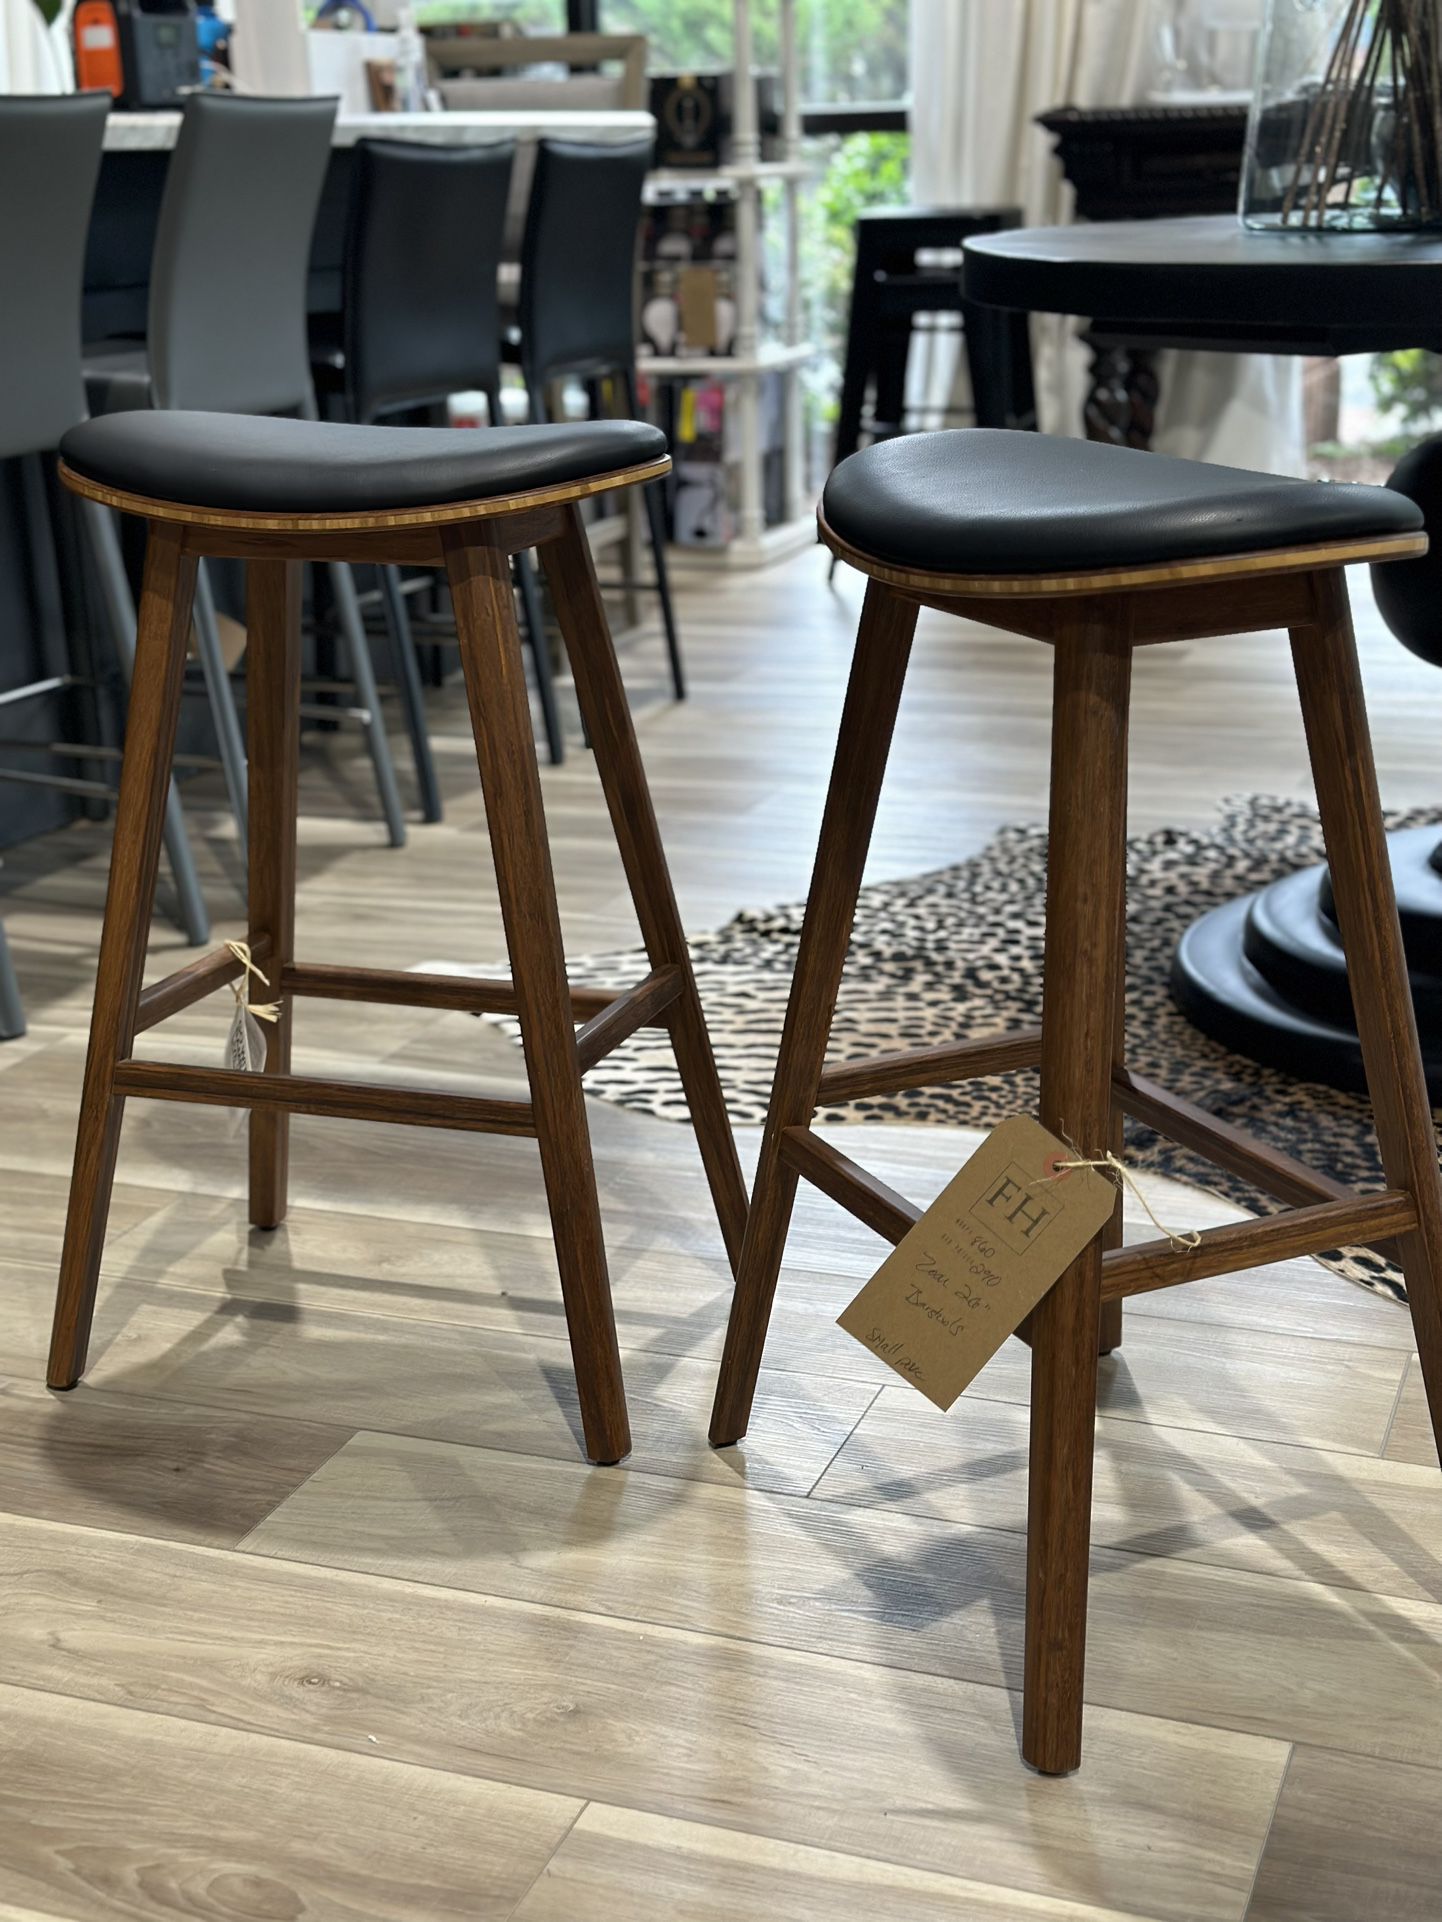 {TWO} Zoar 26" Bar Stools. One minor poke- see picture. MSRP $869. Our price $290 + sales tax 